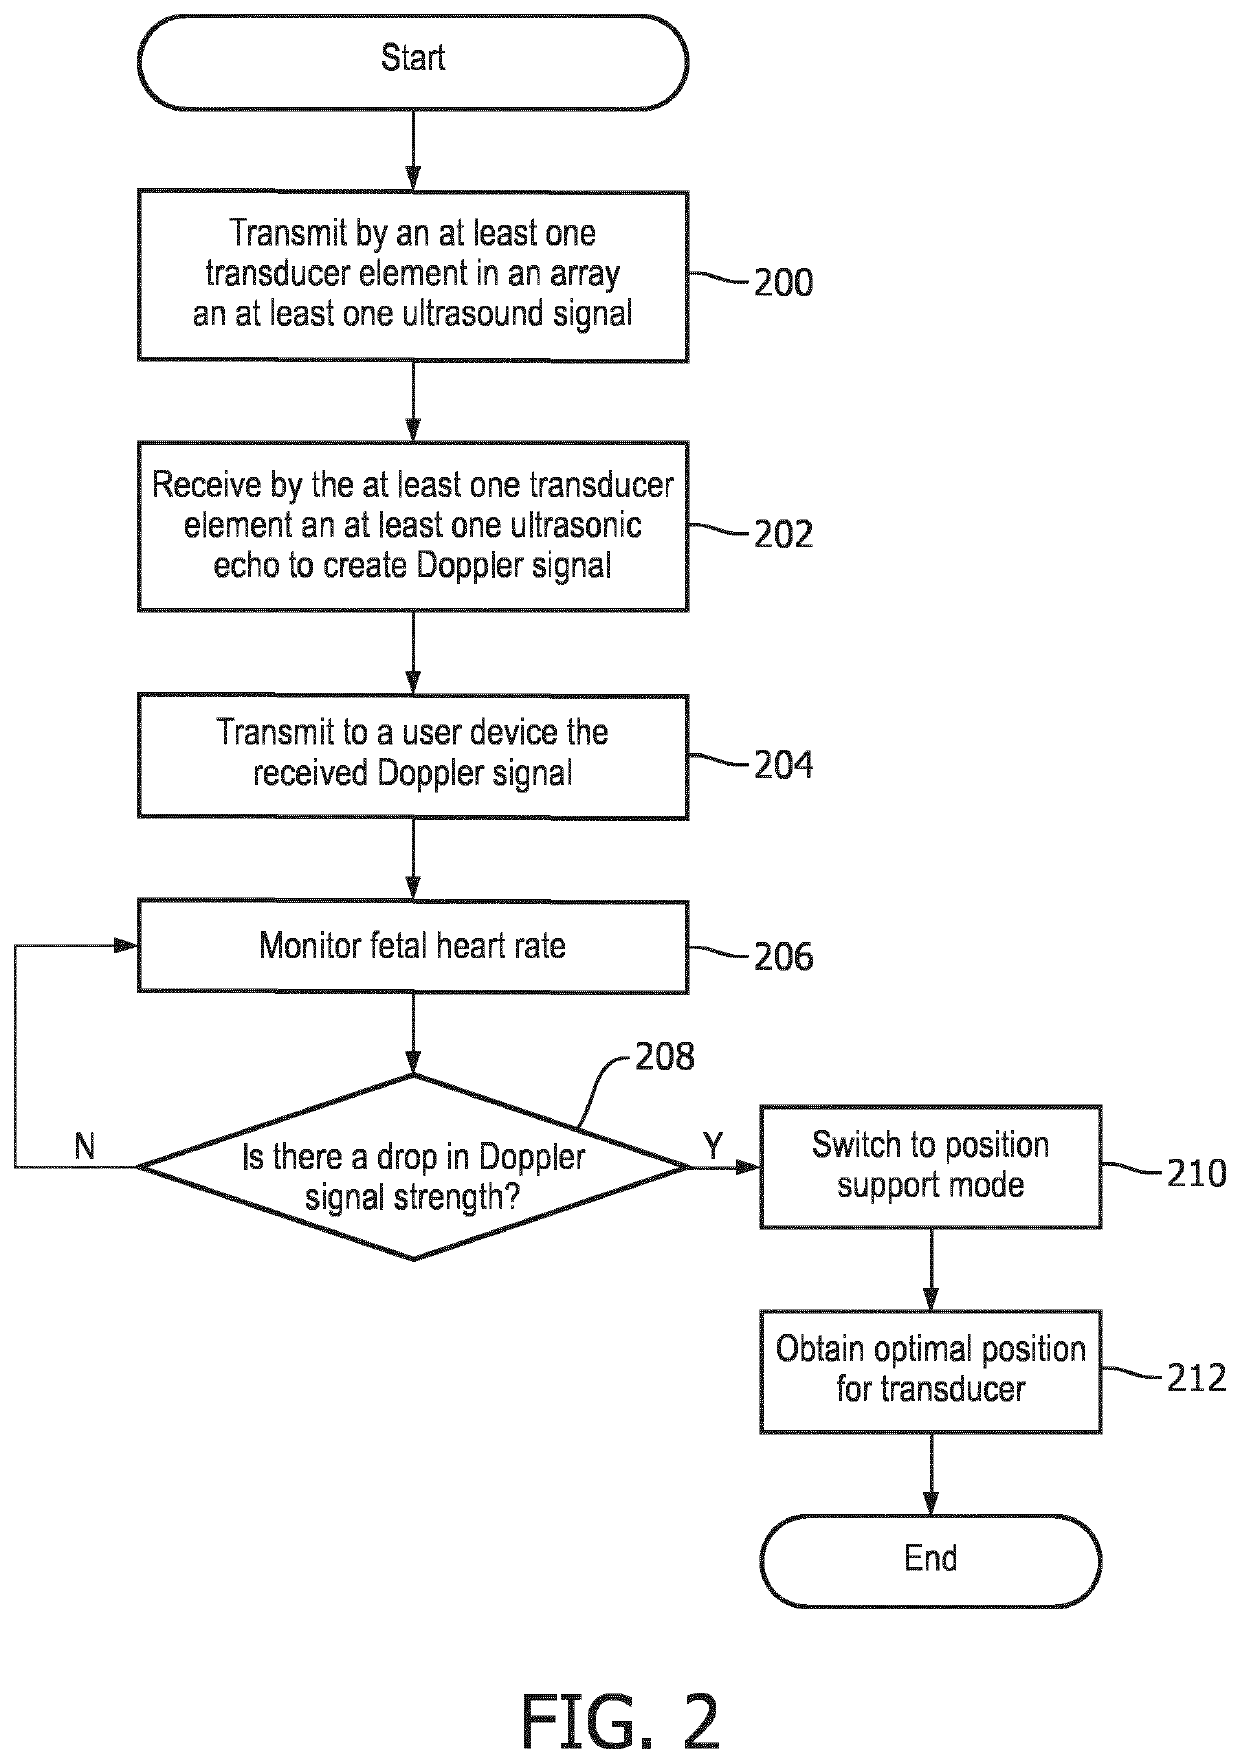 Positioning support and fetal heart rate registration support for CTG ultrasound transducers